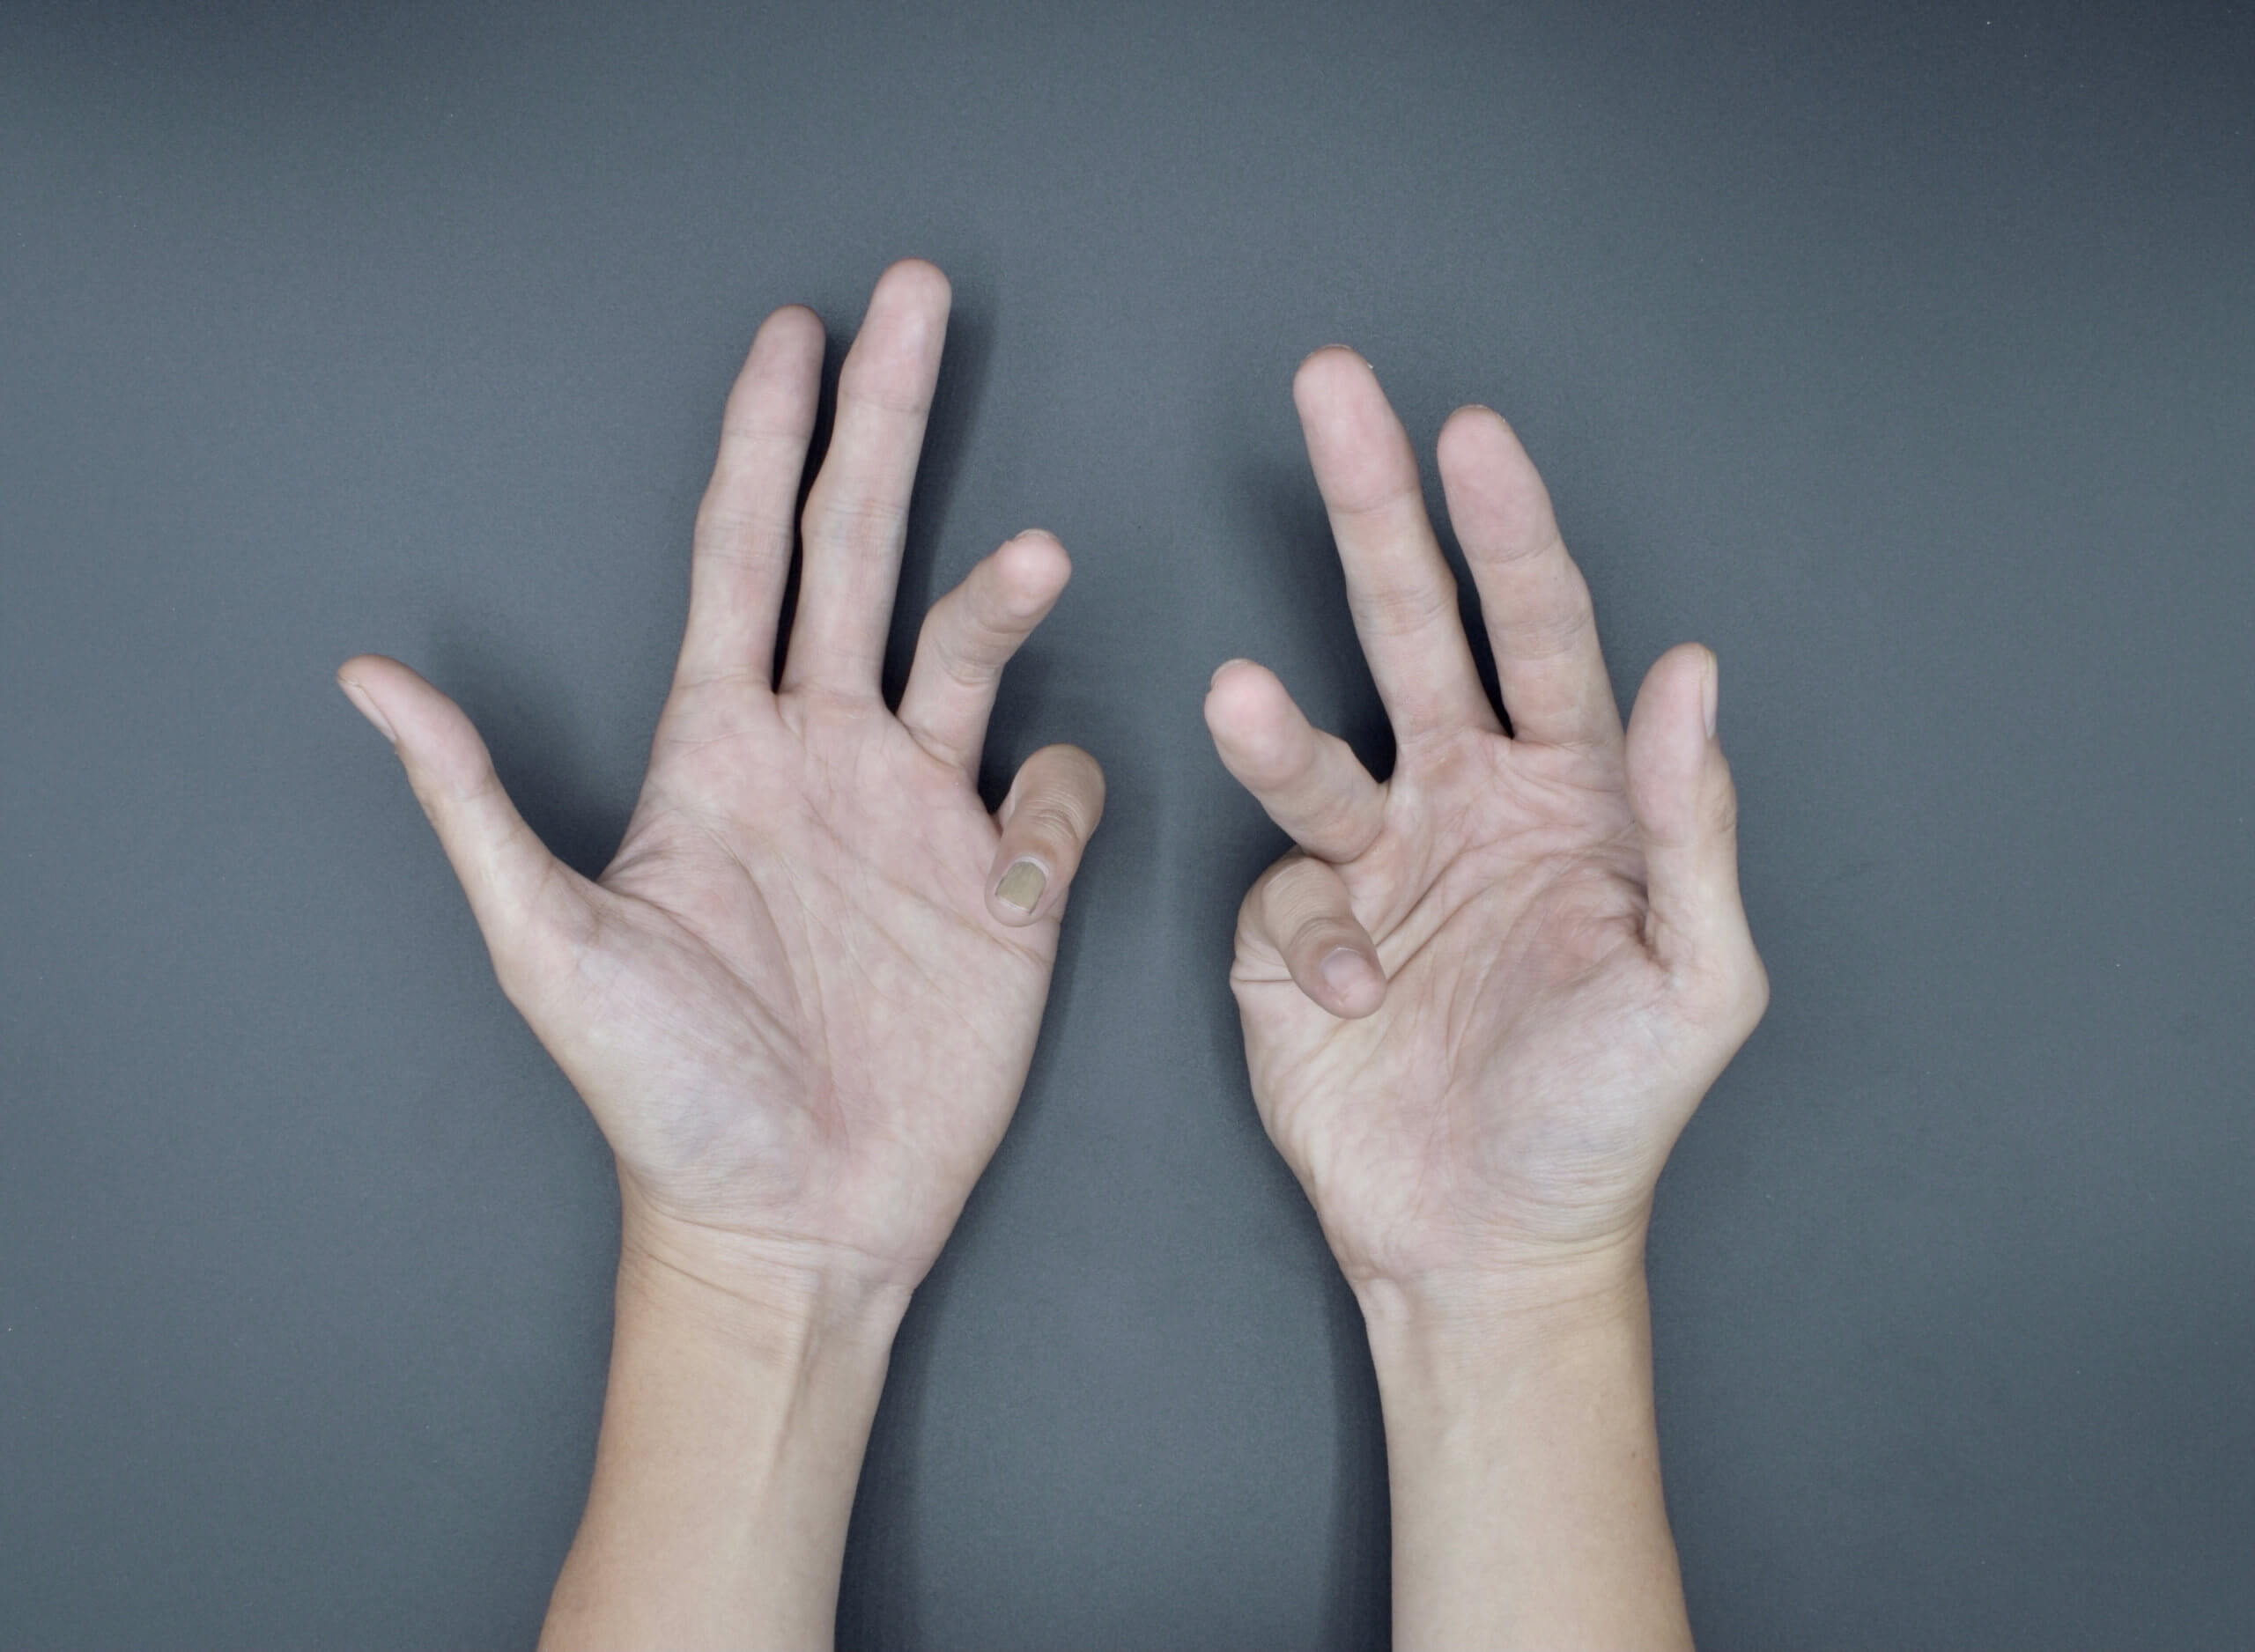 Palm-up view of hands with Dupuytren’s contracture.